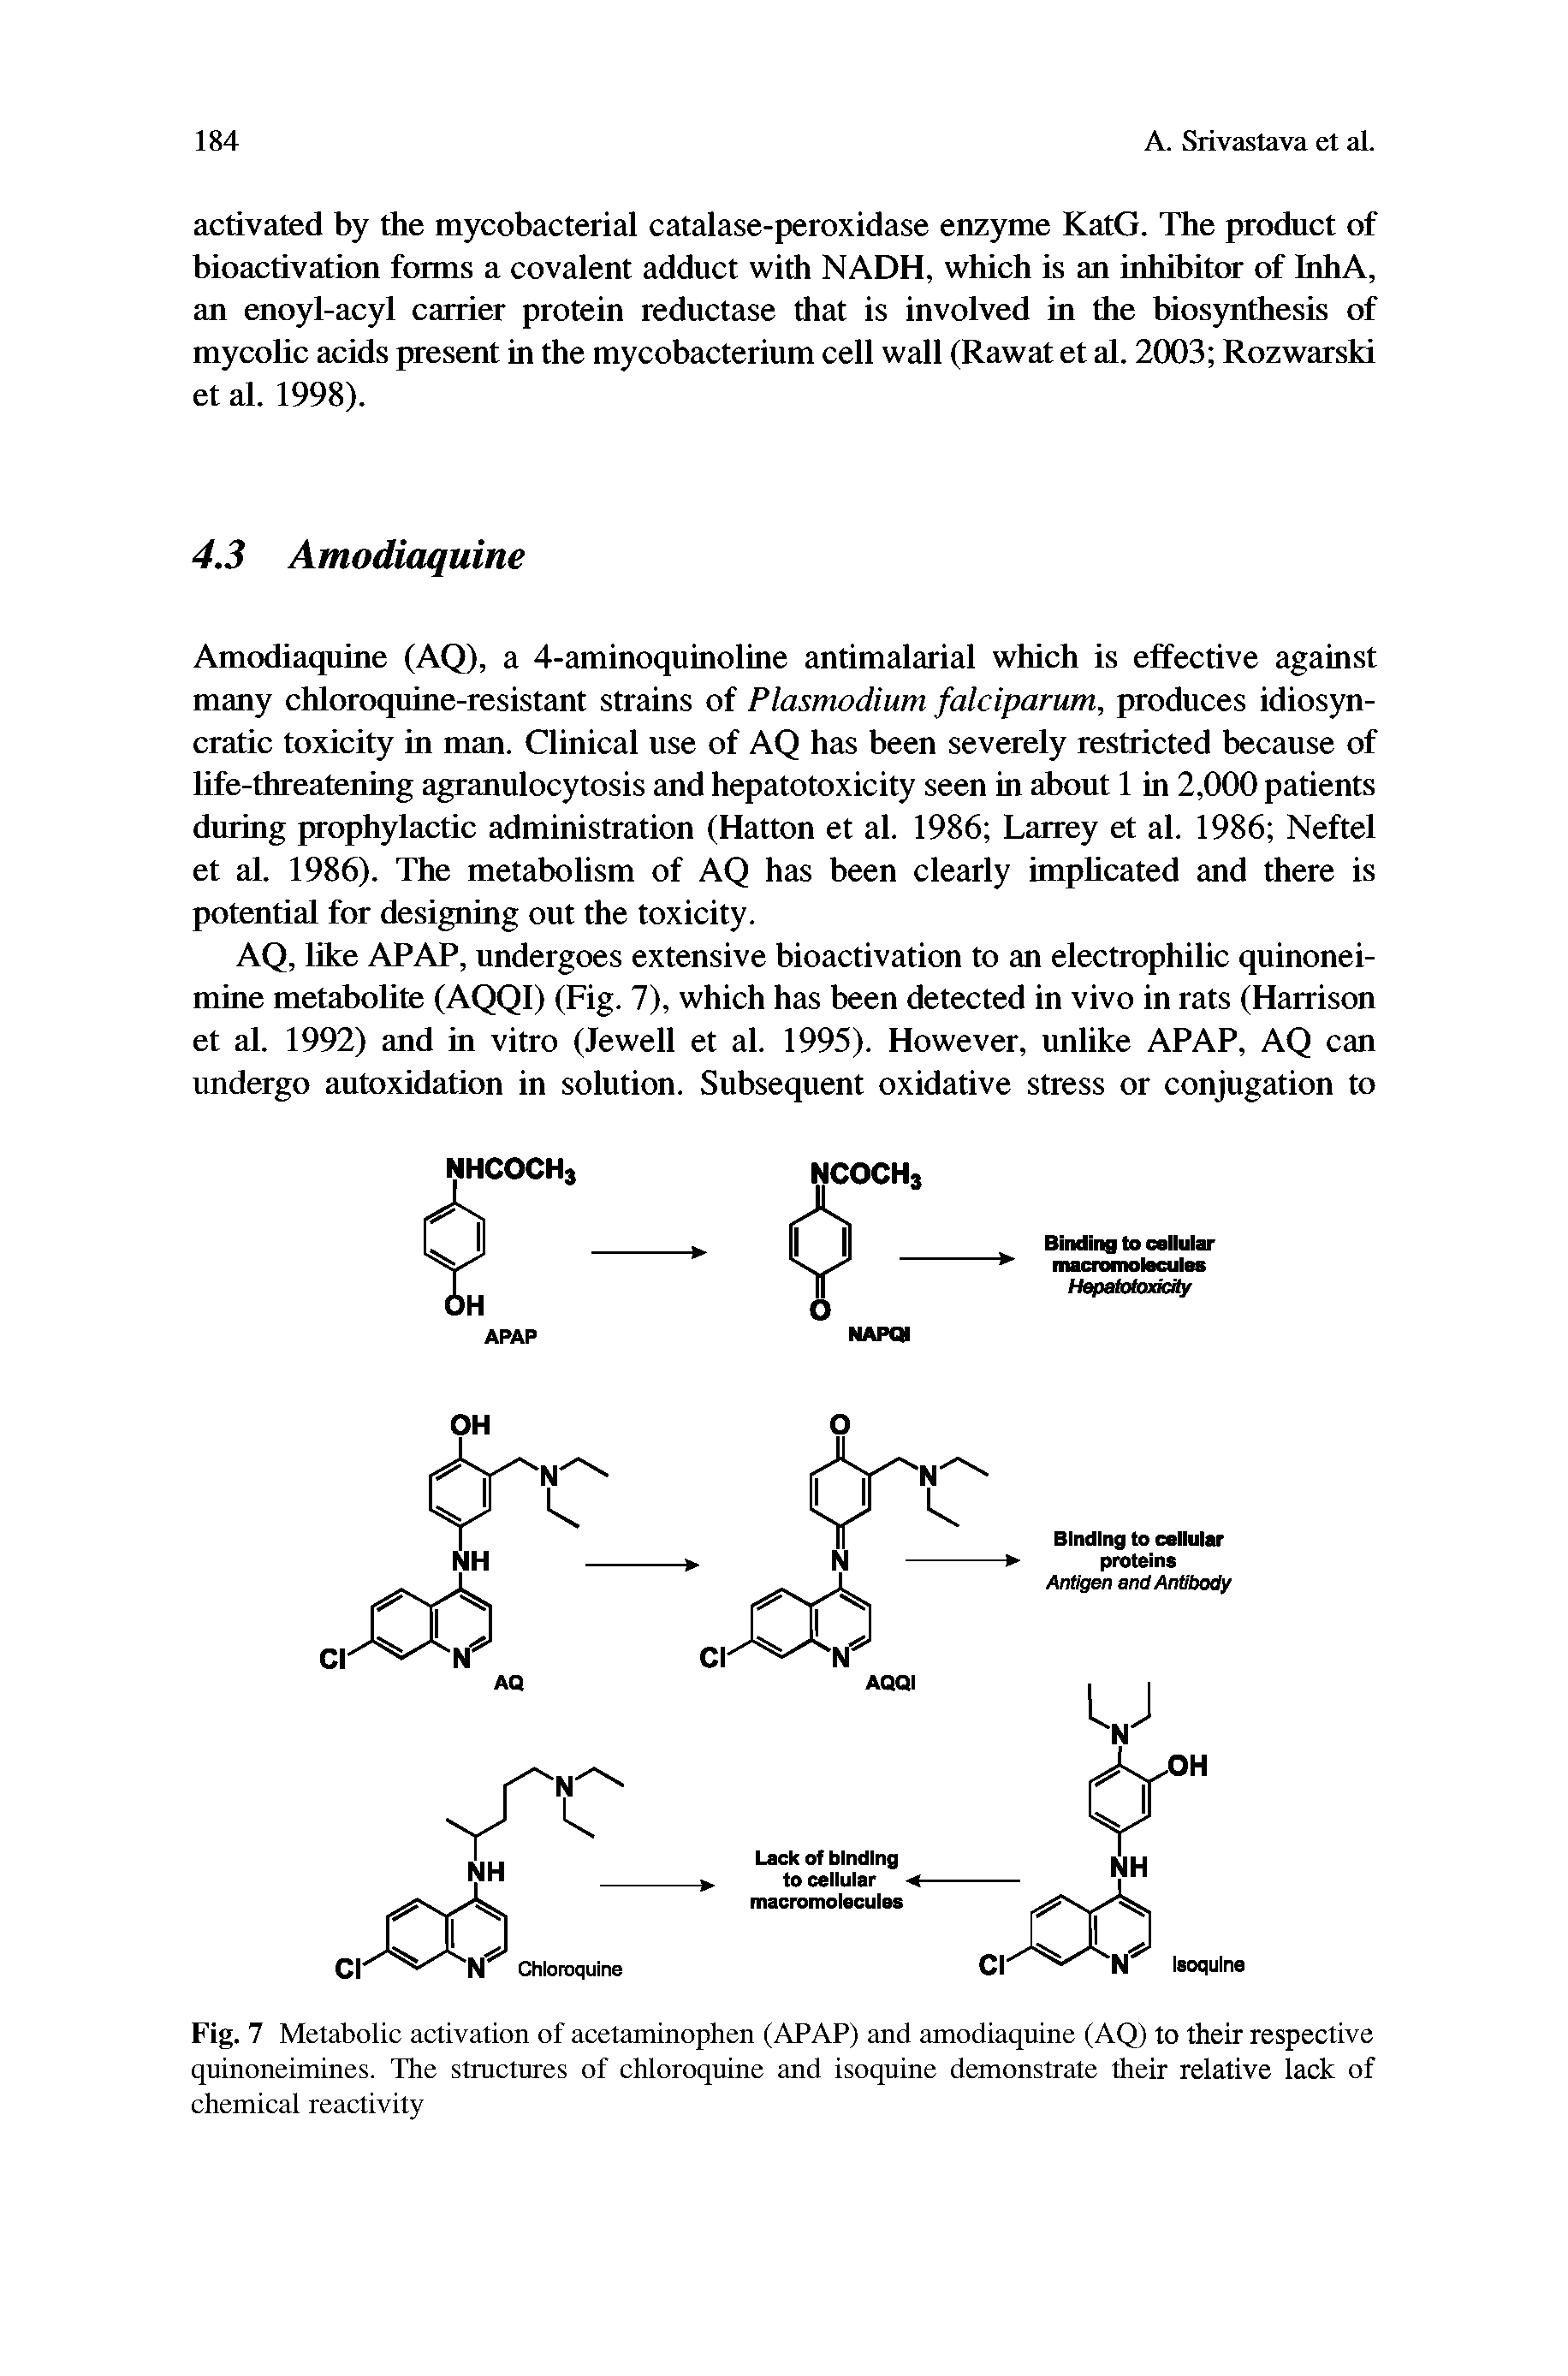 Fig. 7 Metabolic activation of acetaminophen (APAP) and amodiaquine (AQ) to their respective quinoneimines. The stmctures of chloroquine and isoquine demonstrate their relative lack of chemical reactivity...